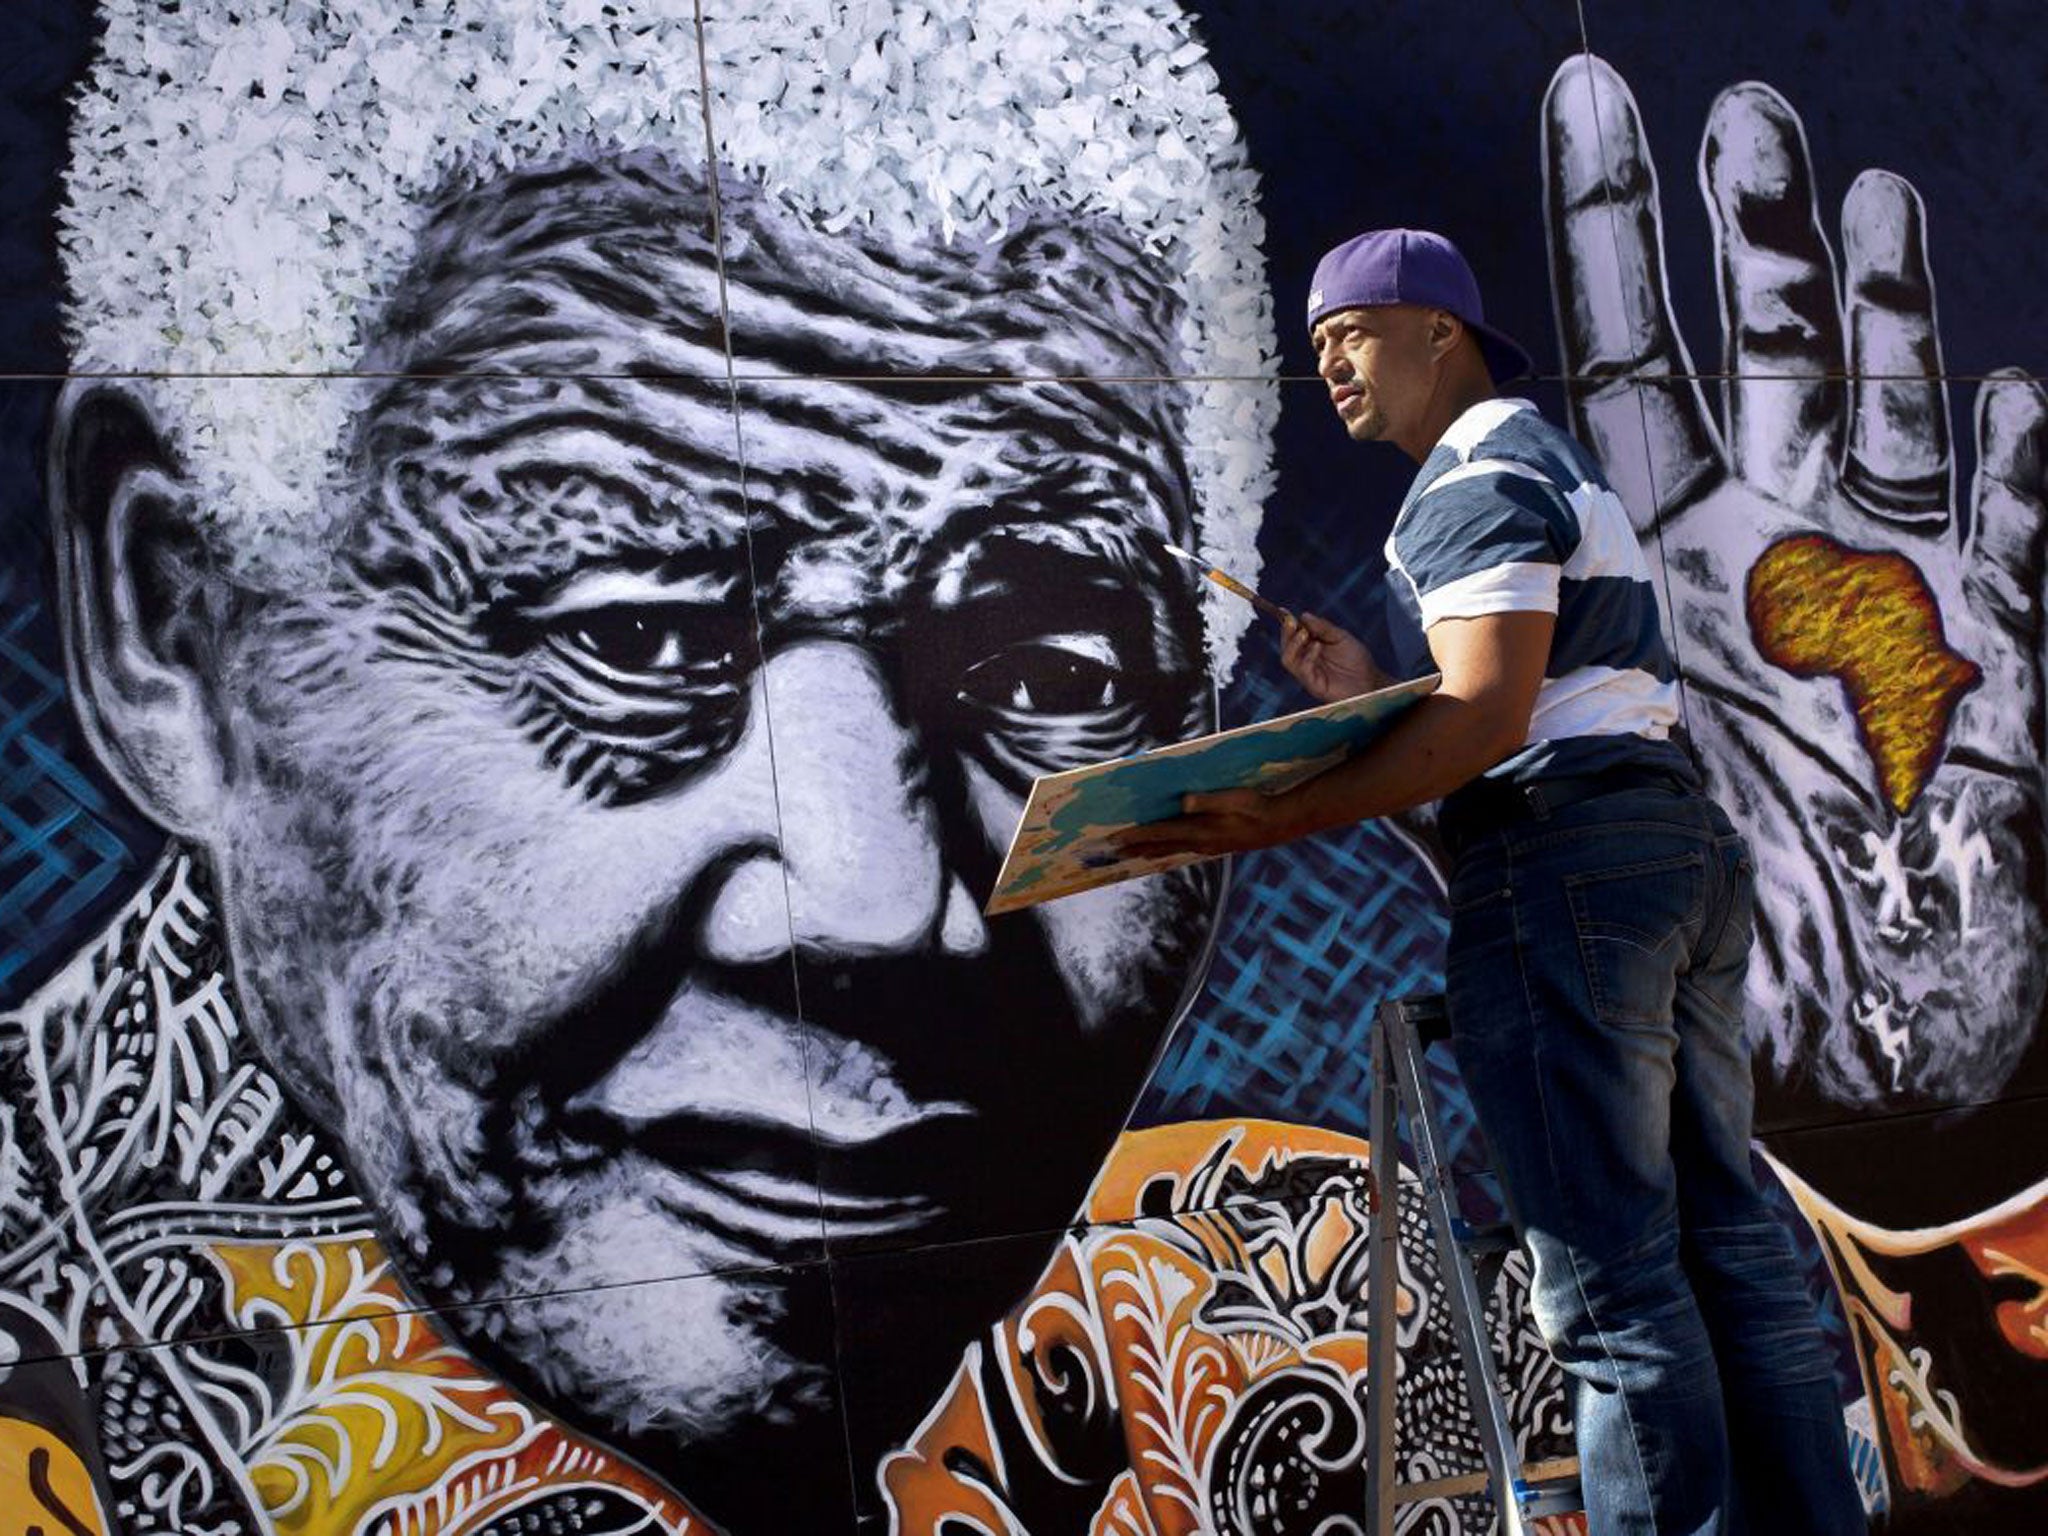 The artist John Adams puts the finishing touches to a giant acrylic on canvas painting of Nelson Mandela outside his house in a suburb of Johannesburg on Monday